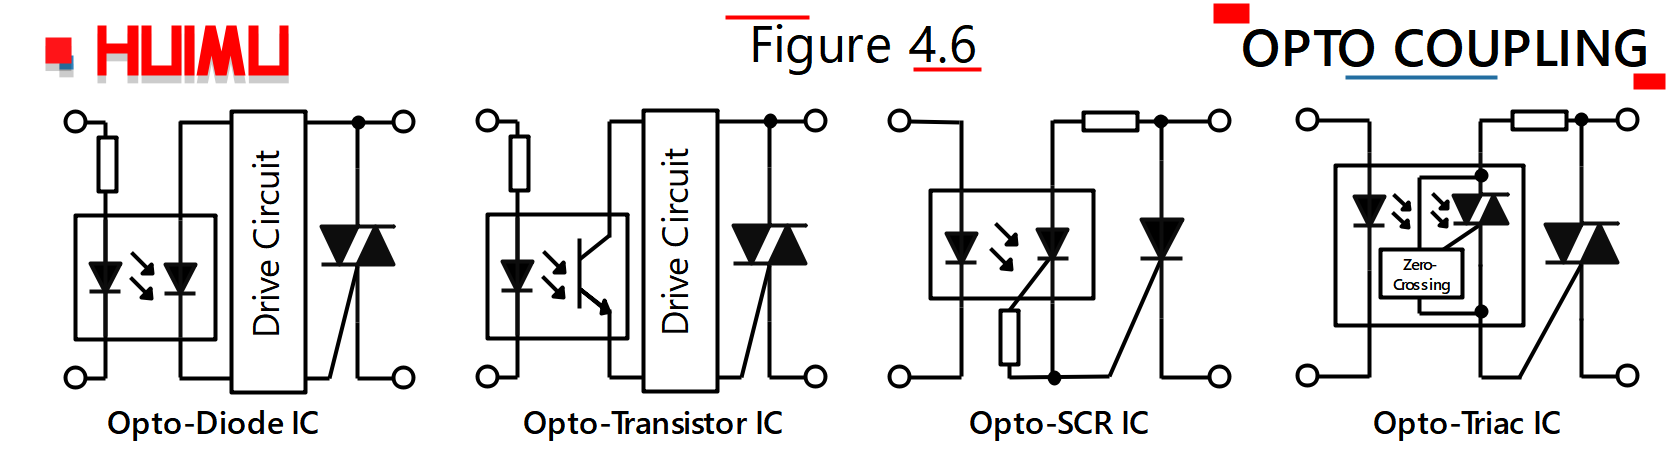 According to the different components , the opto-coupler can be into Opto-Diode Coupler(Photo-Diode Coupler), Opto-Transistor Coupler (Photo-Transistor Coupler), Opto-SCR Coupler (Photo-SCR Coupler), and Opto-Triac Coupler (Photo-Triac Coupler). 